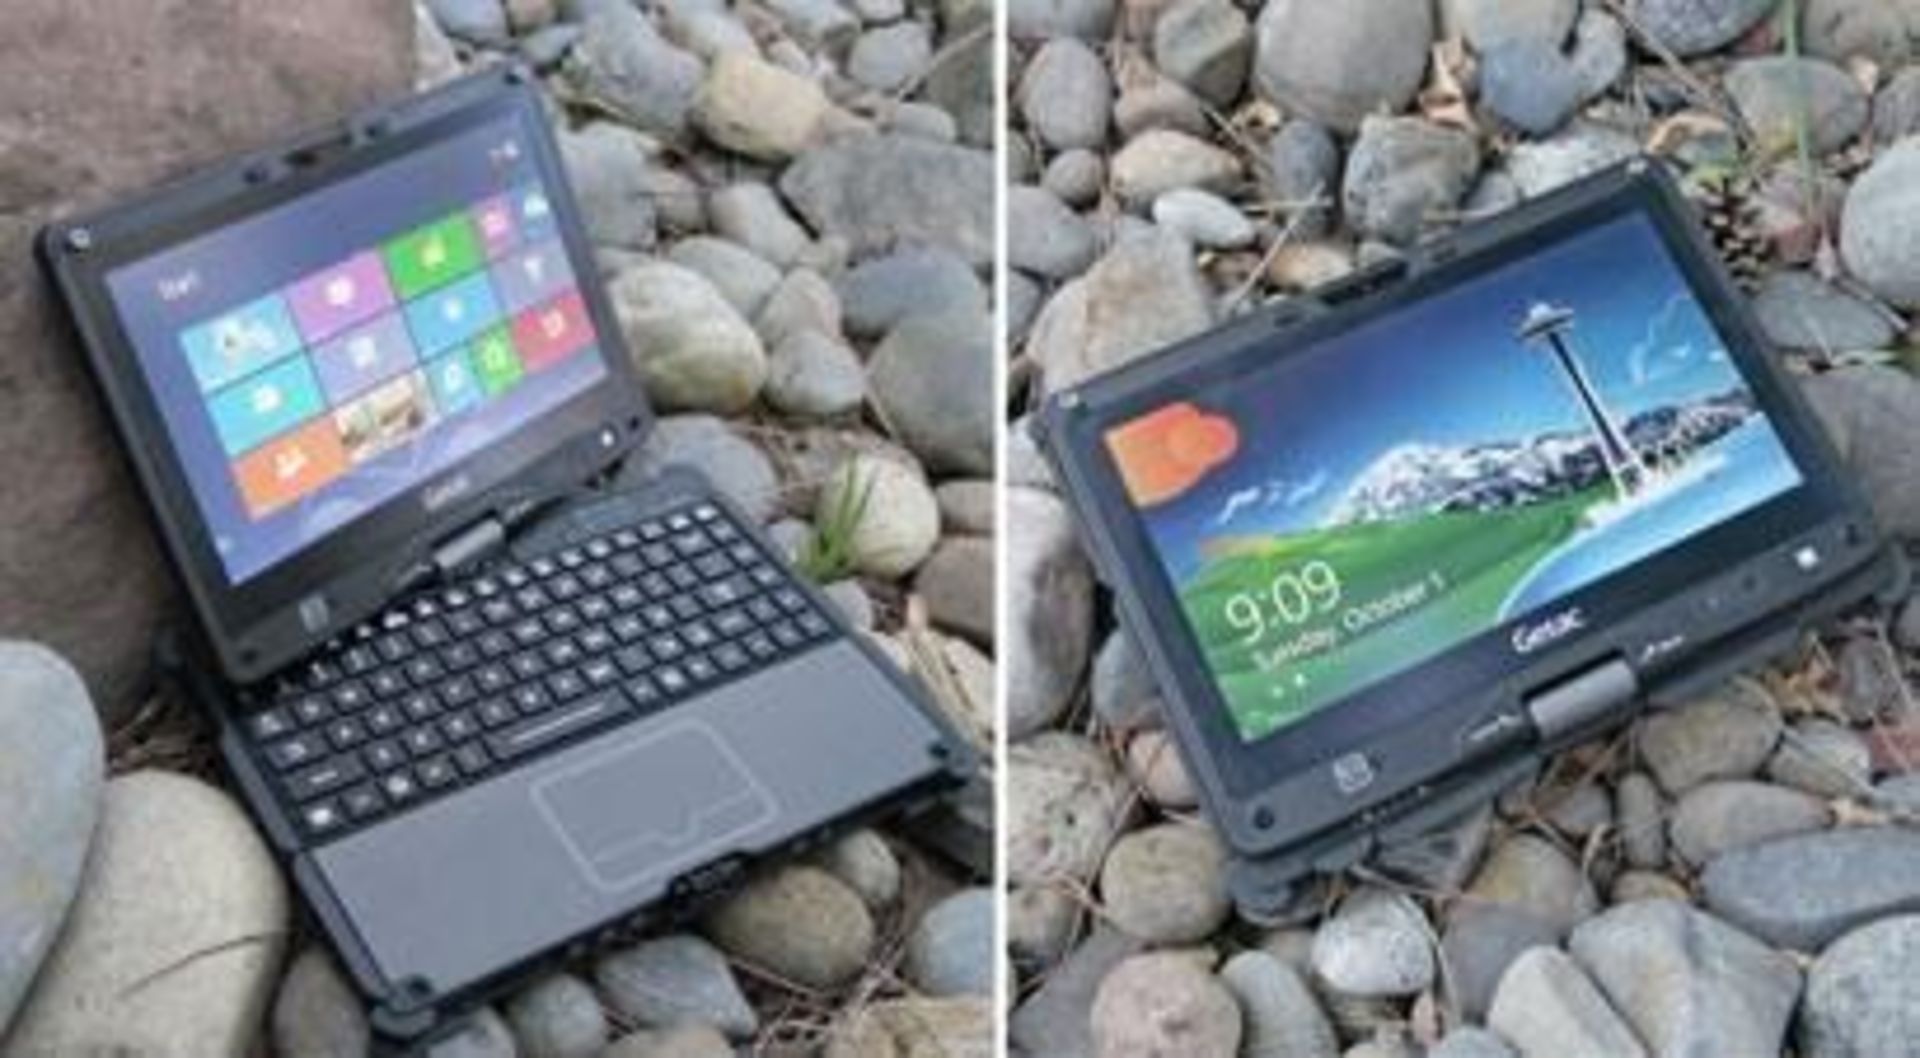 1 x Getac V200 Rugged Laptop Computer - Rugged Laptop That Transforms into a Tablet PC - Features an - Image 7 of 8